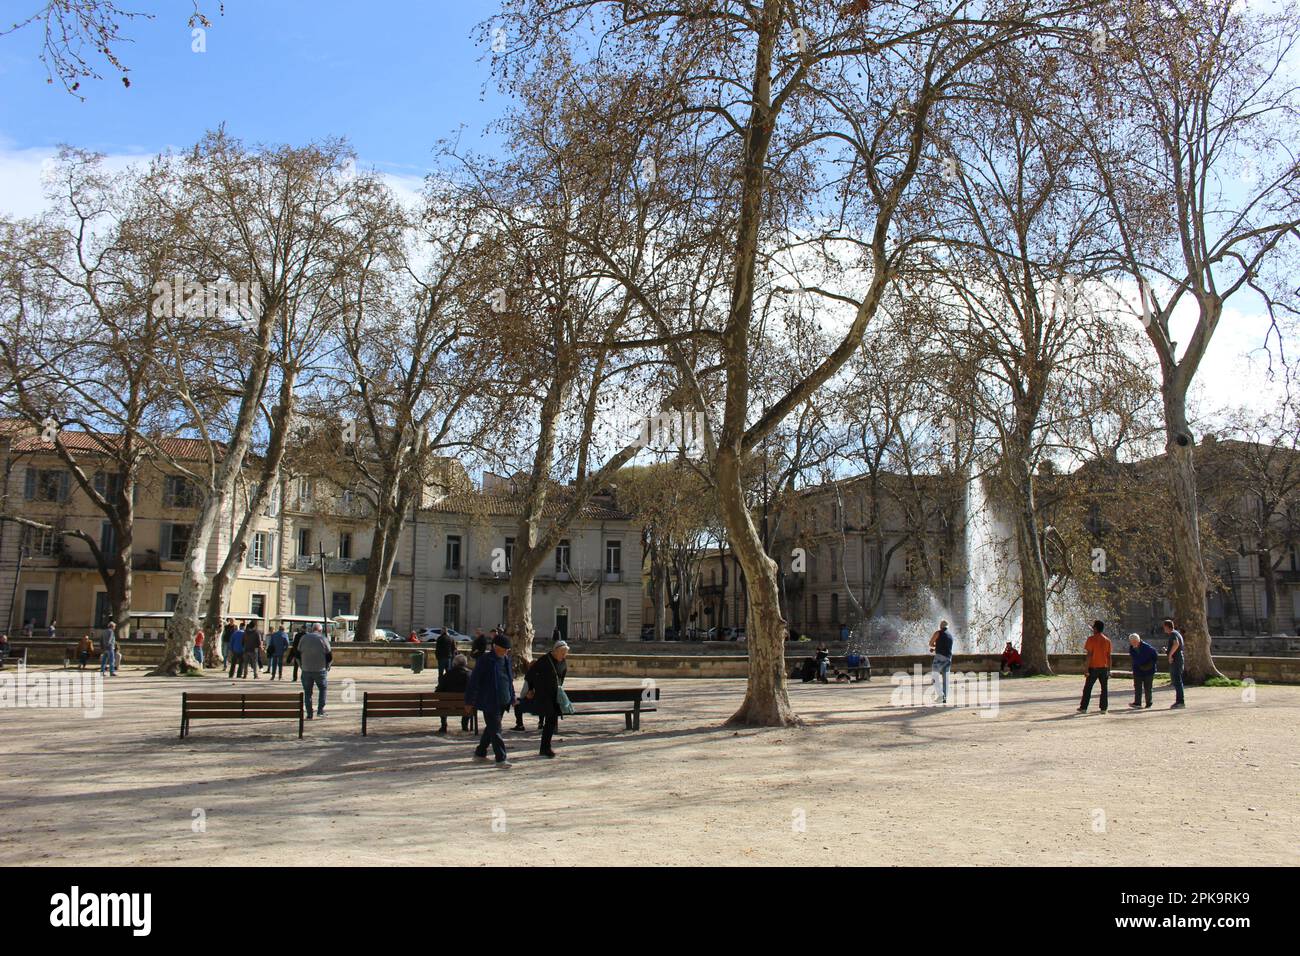 Nimes Pétanque players in early spring Stock Photo